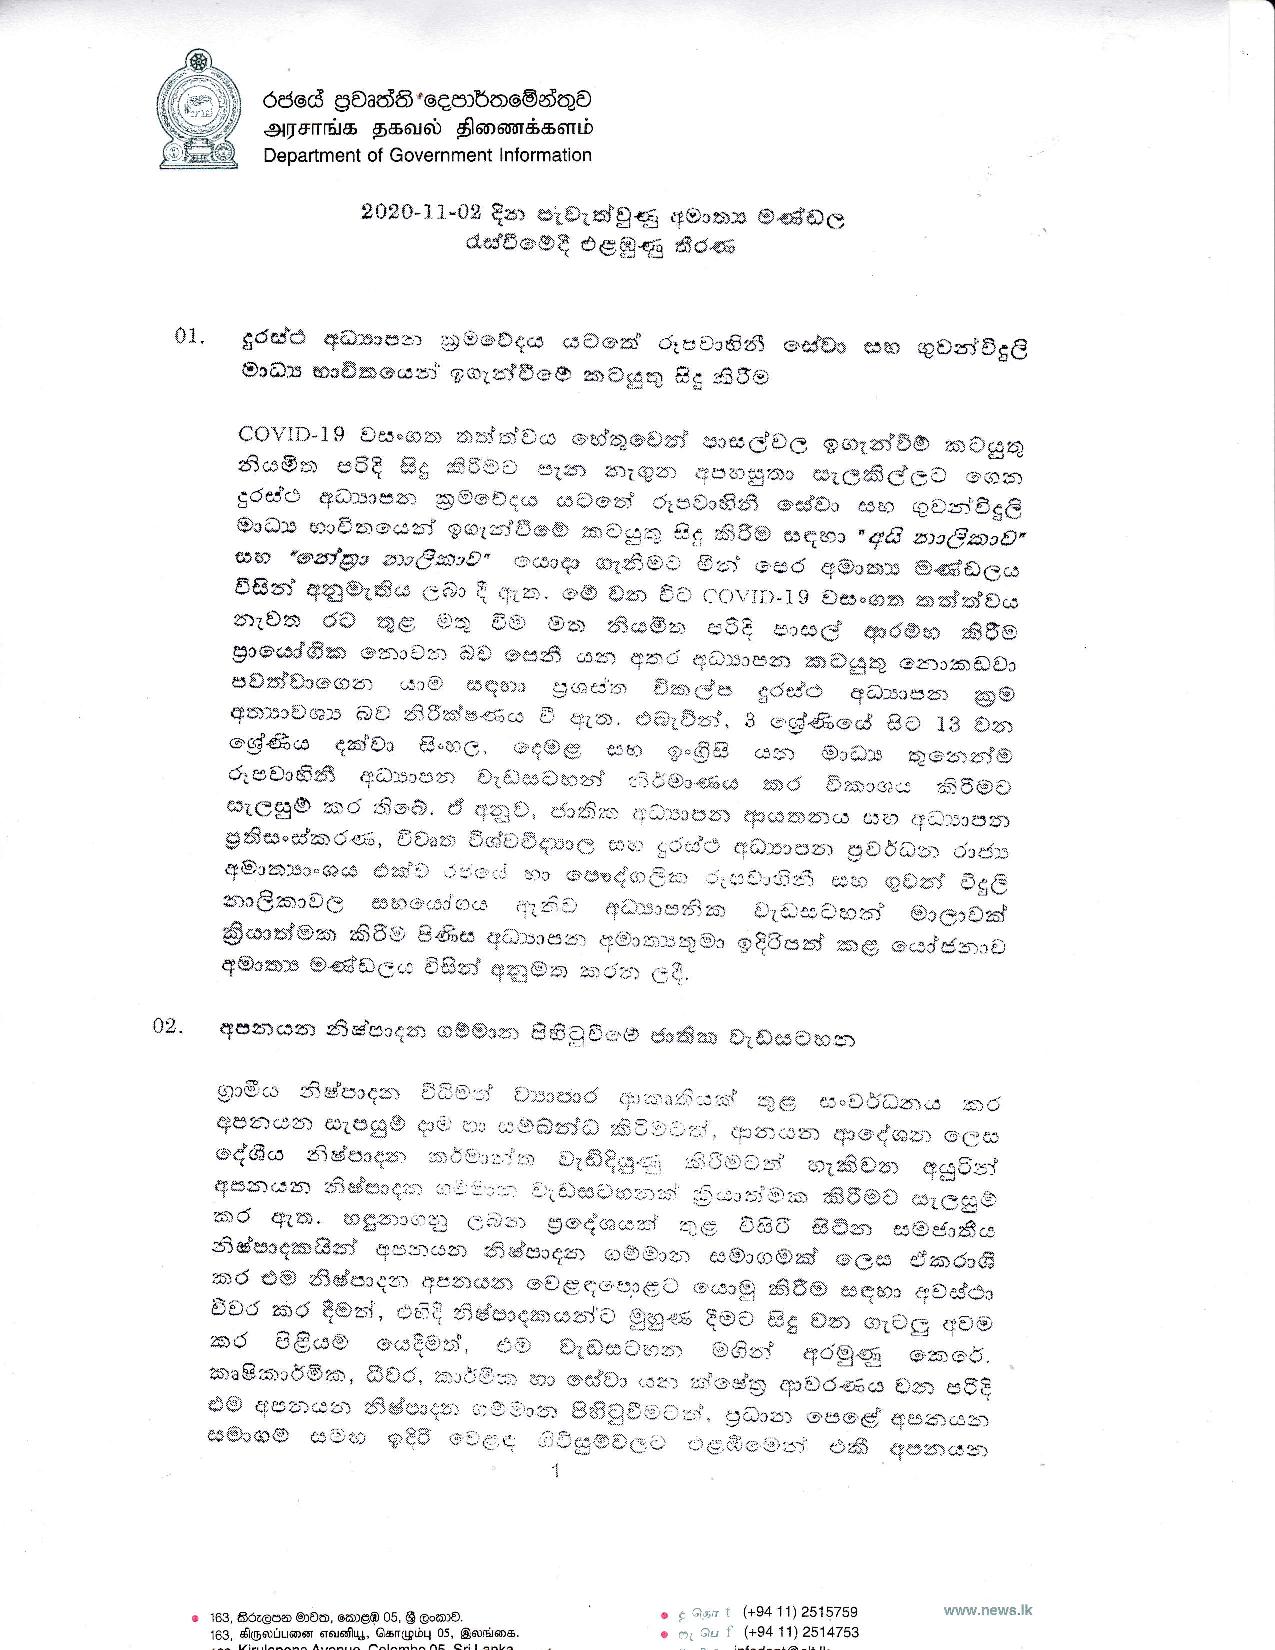 Cabinet Decision on 02.11.2020 page 001